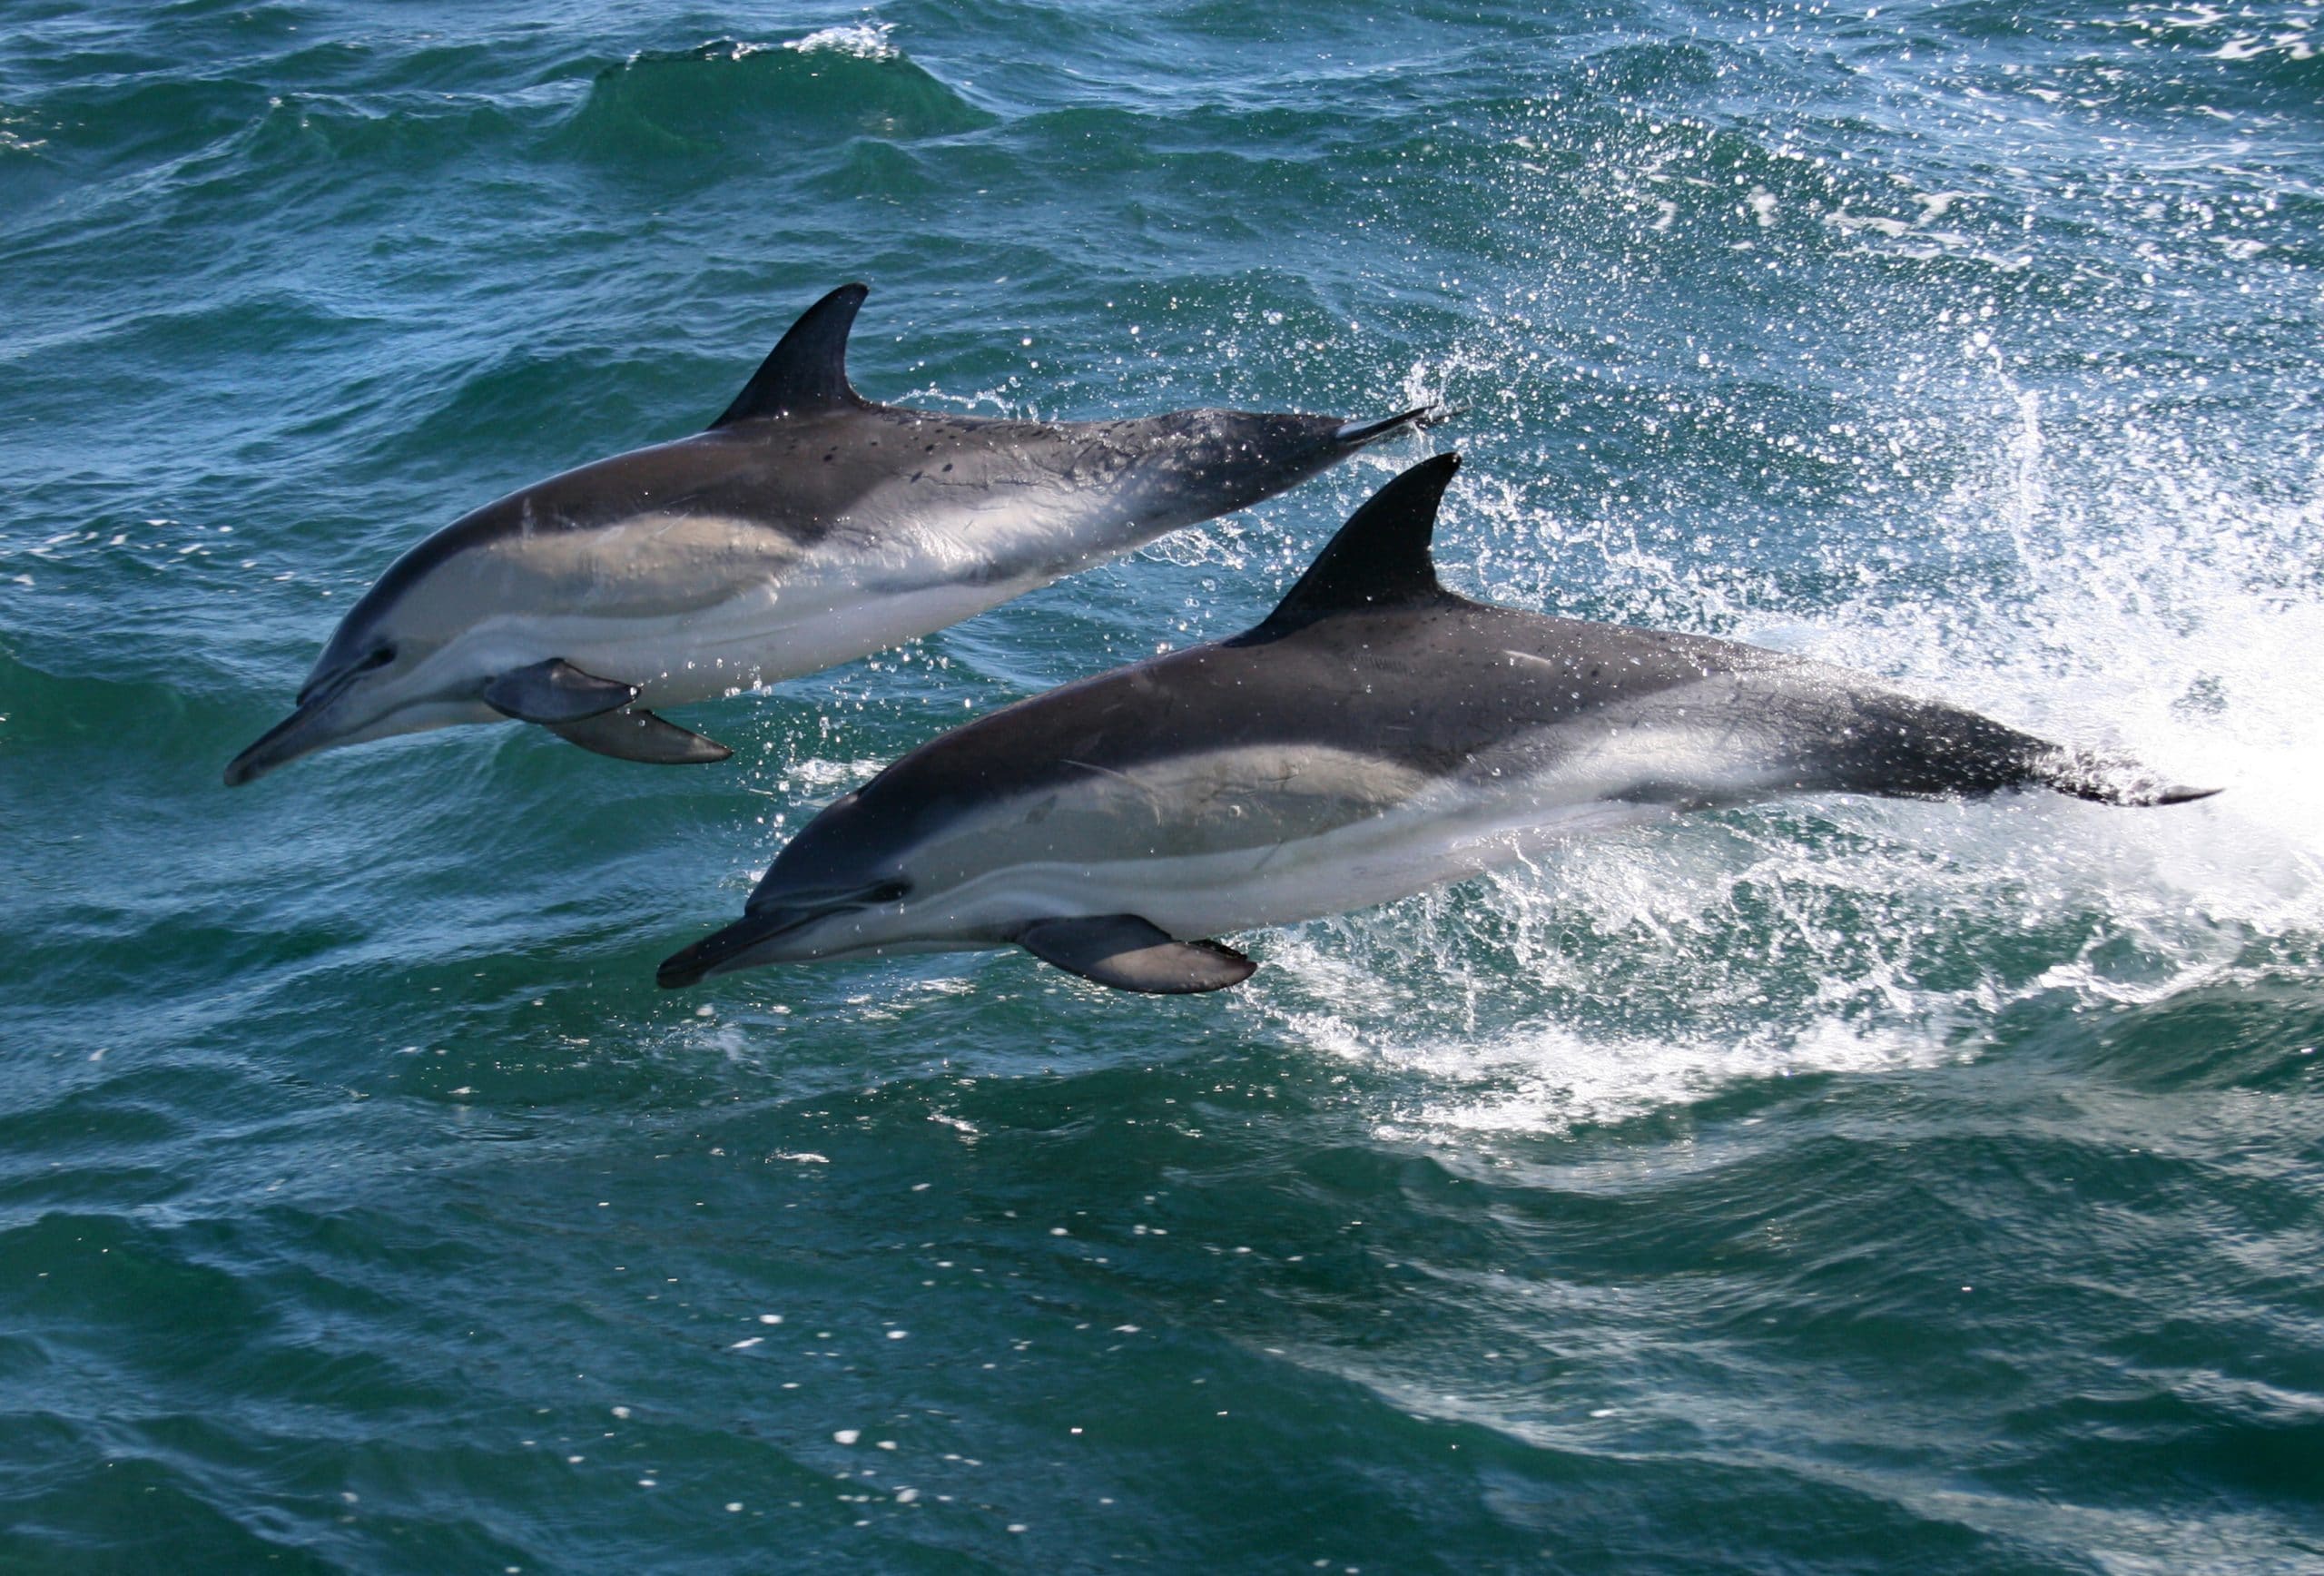 You may spot some dolphins in the Atlantic 